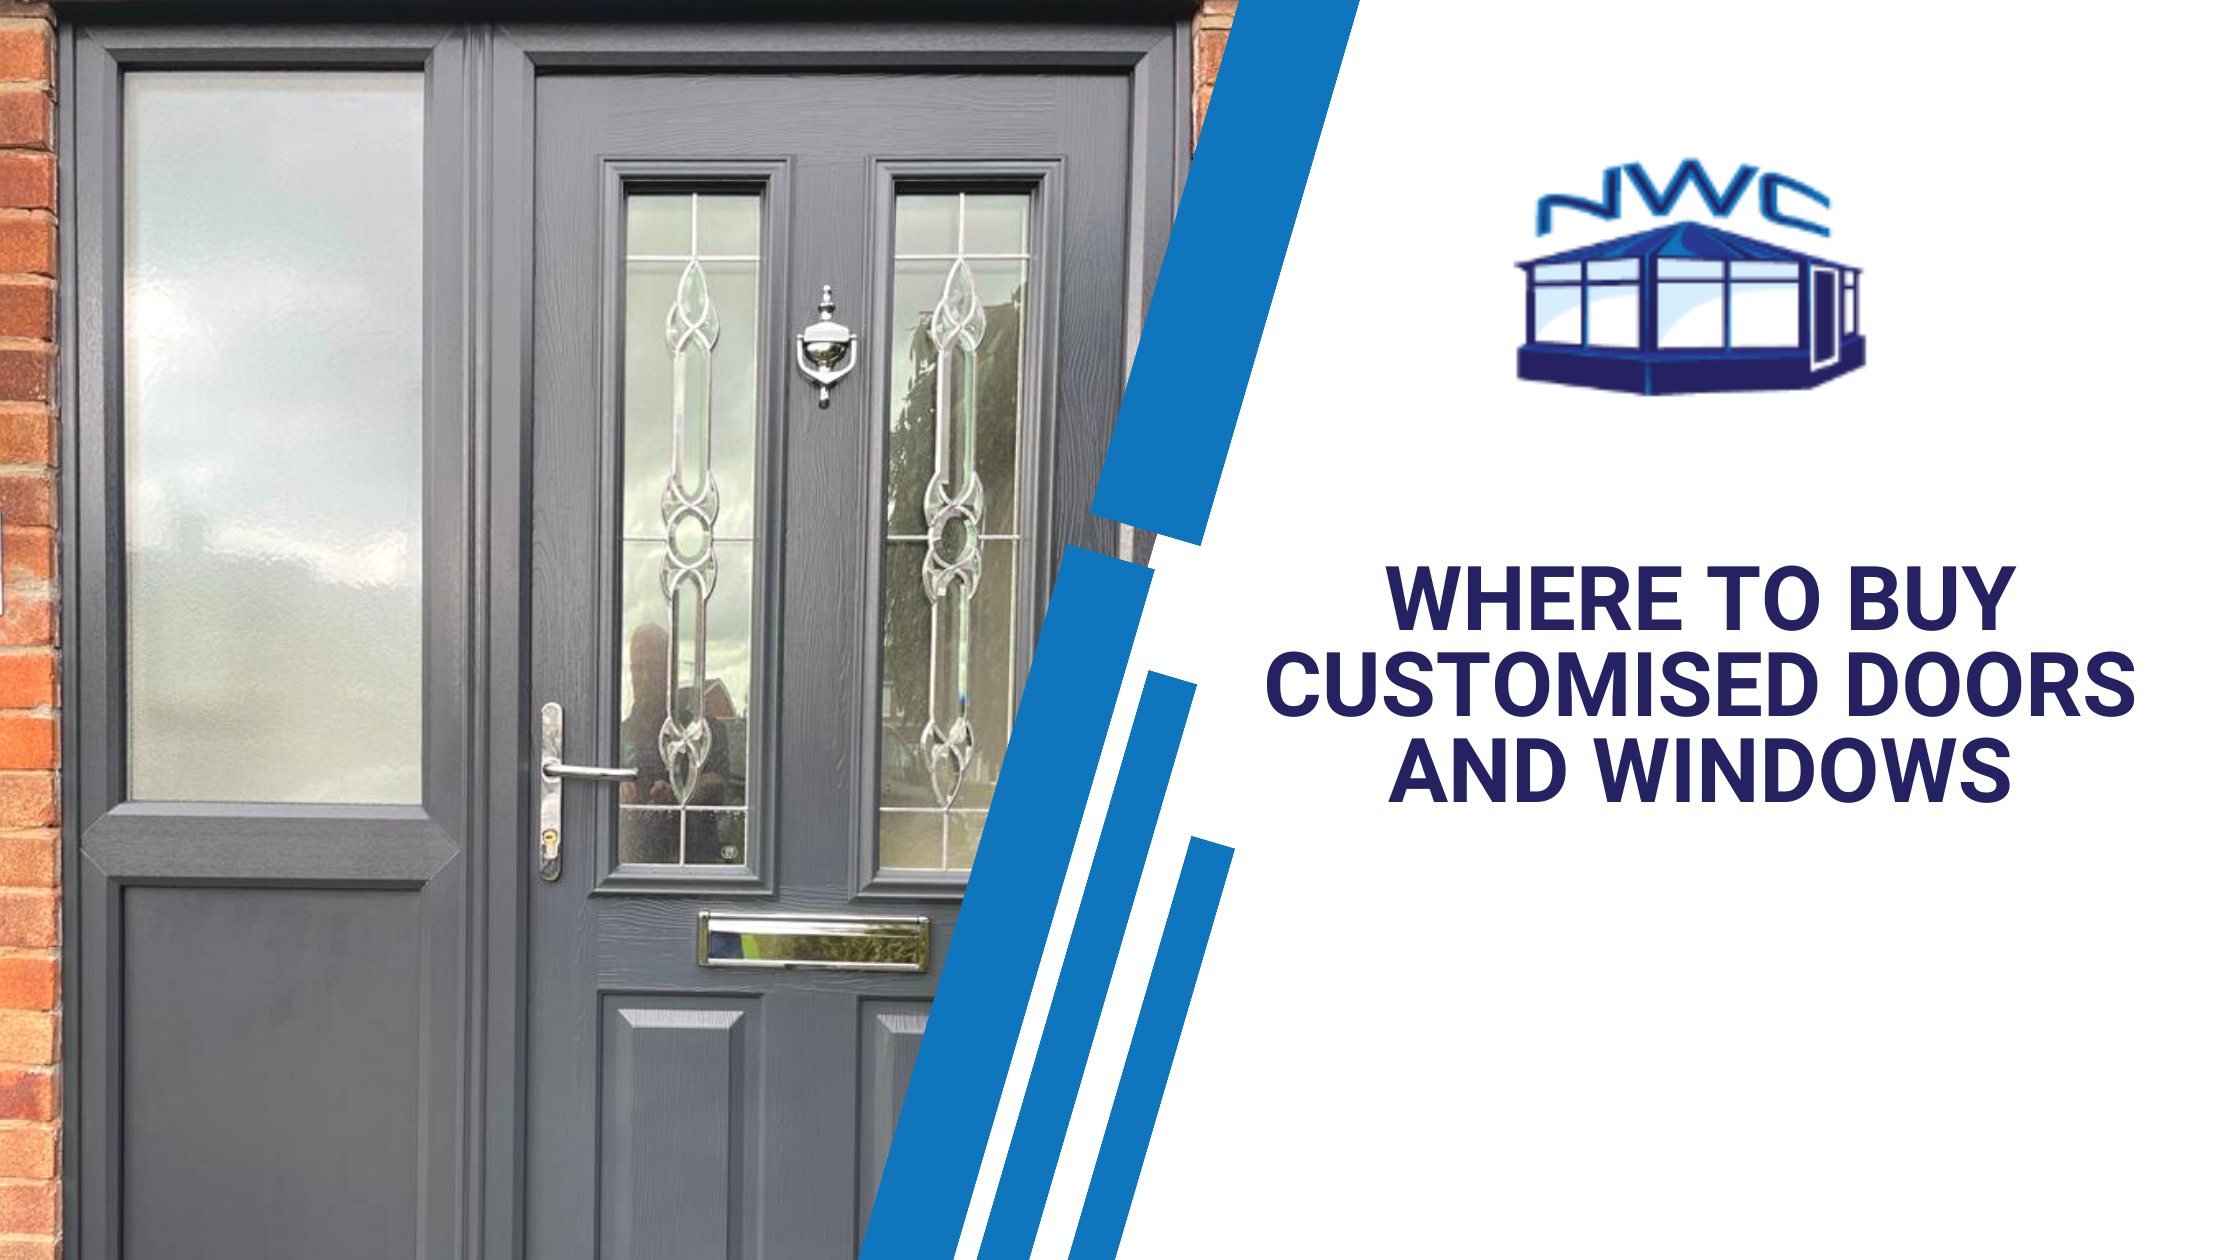 Where to buy customised windows and doors blog banner